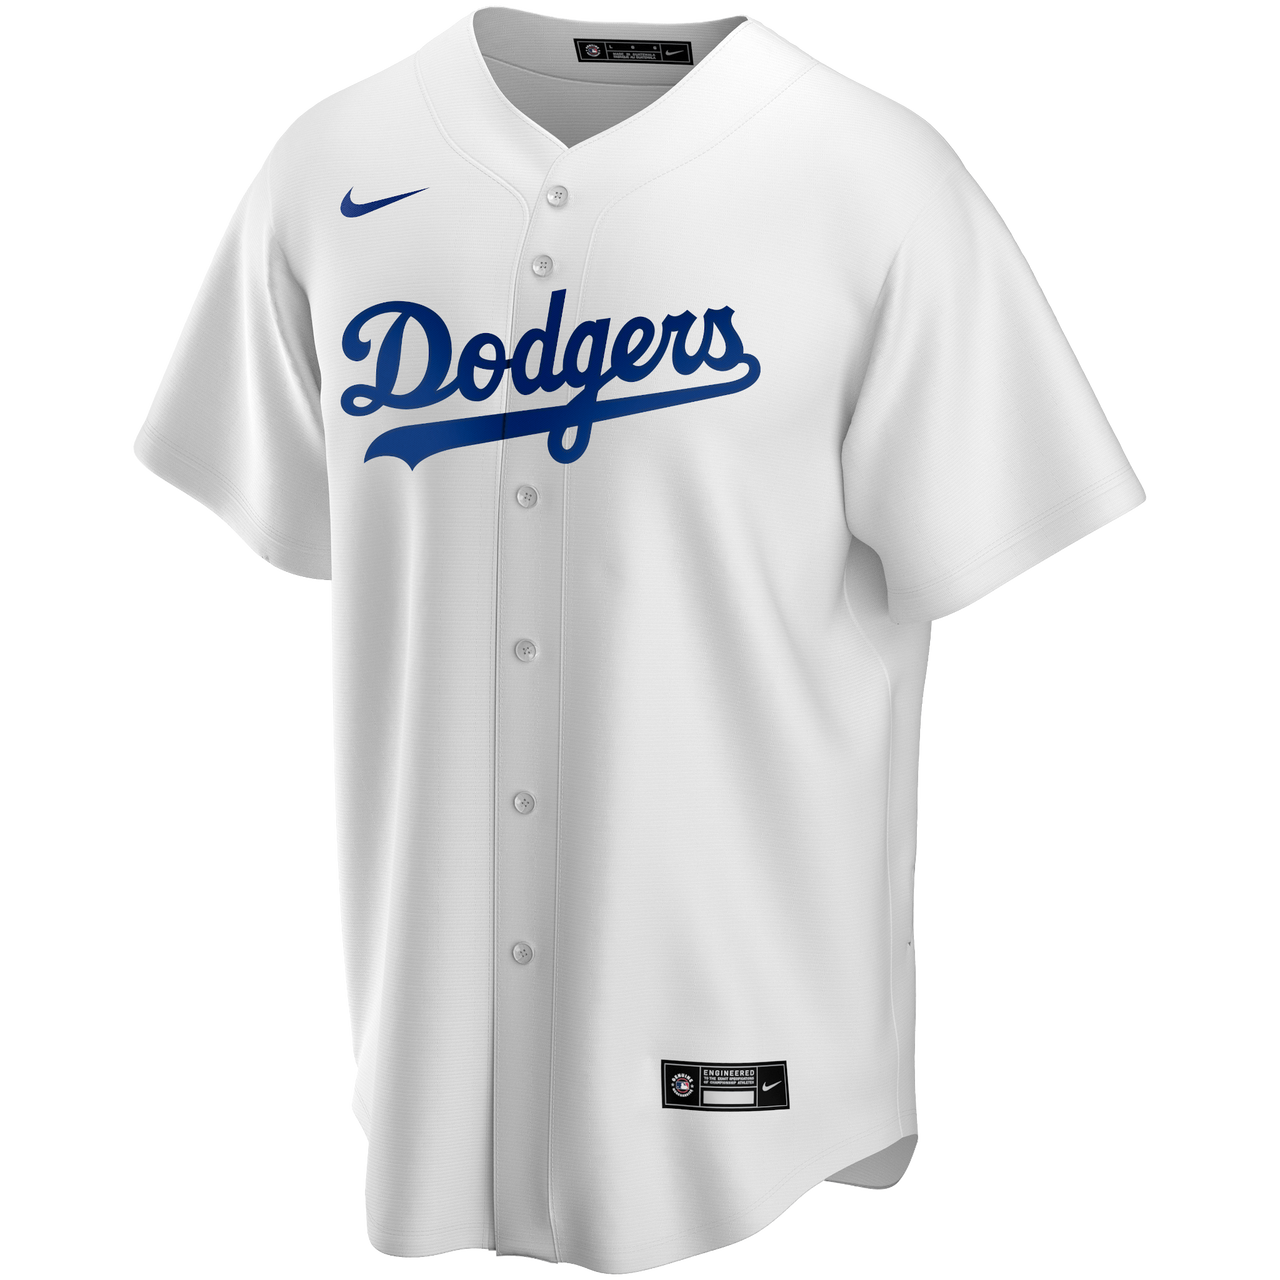 Dodgers Seager Youth Jersey